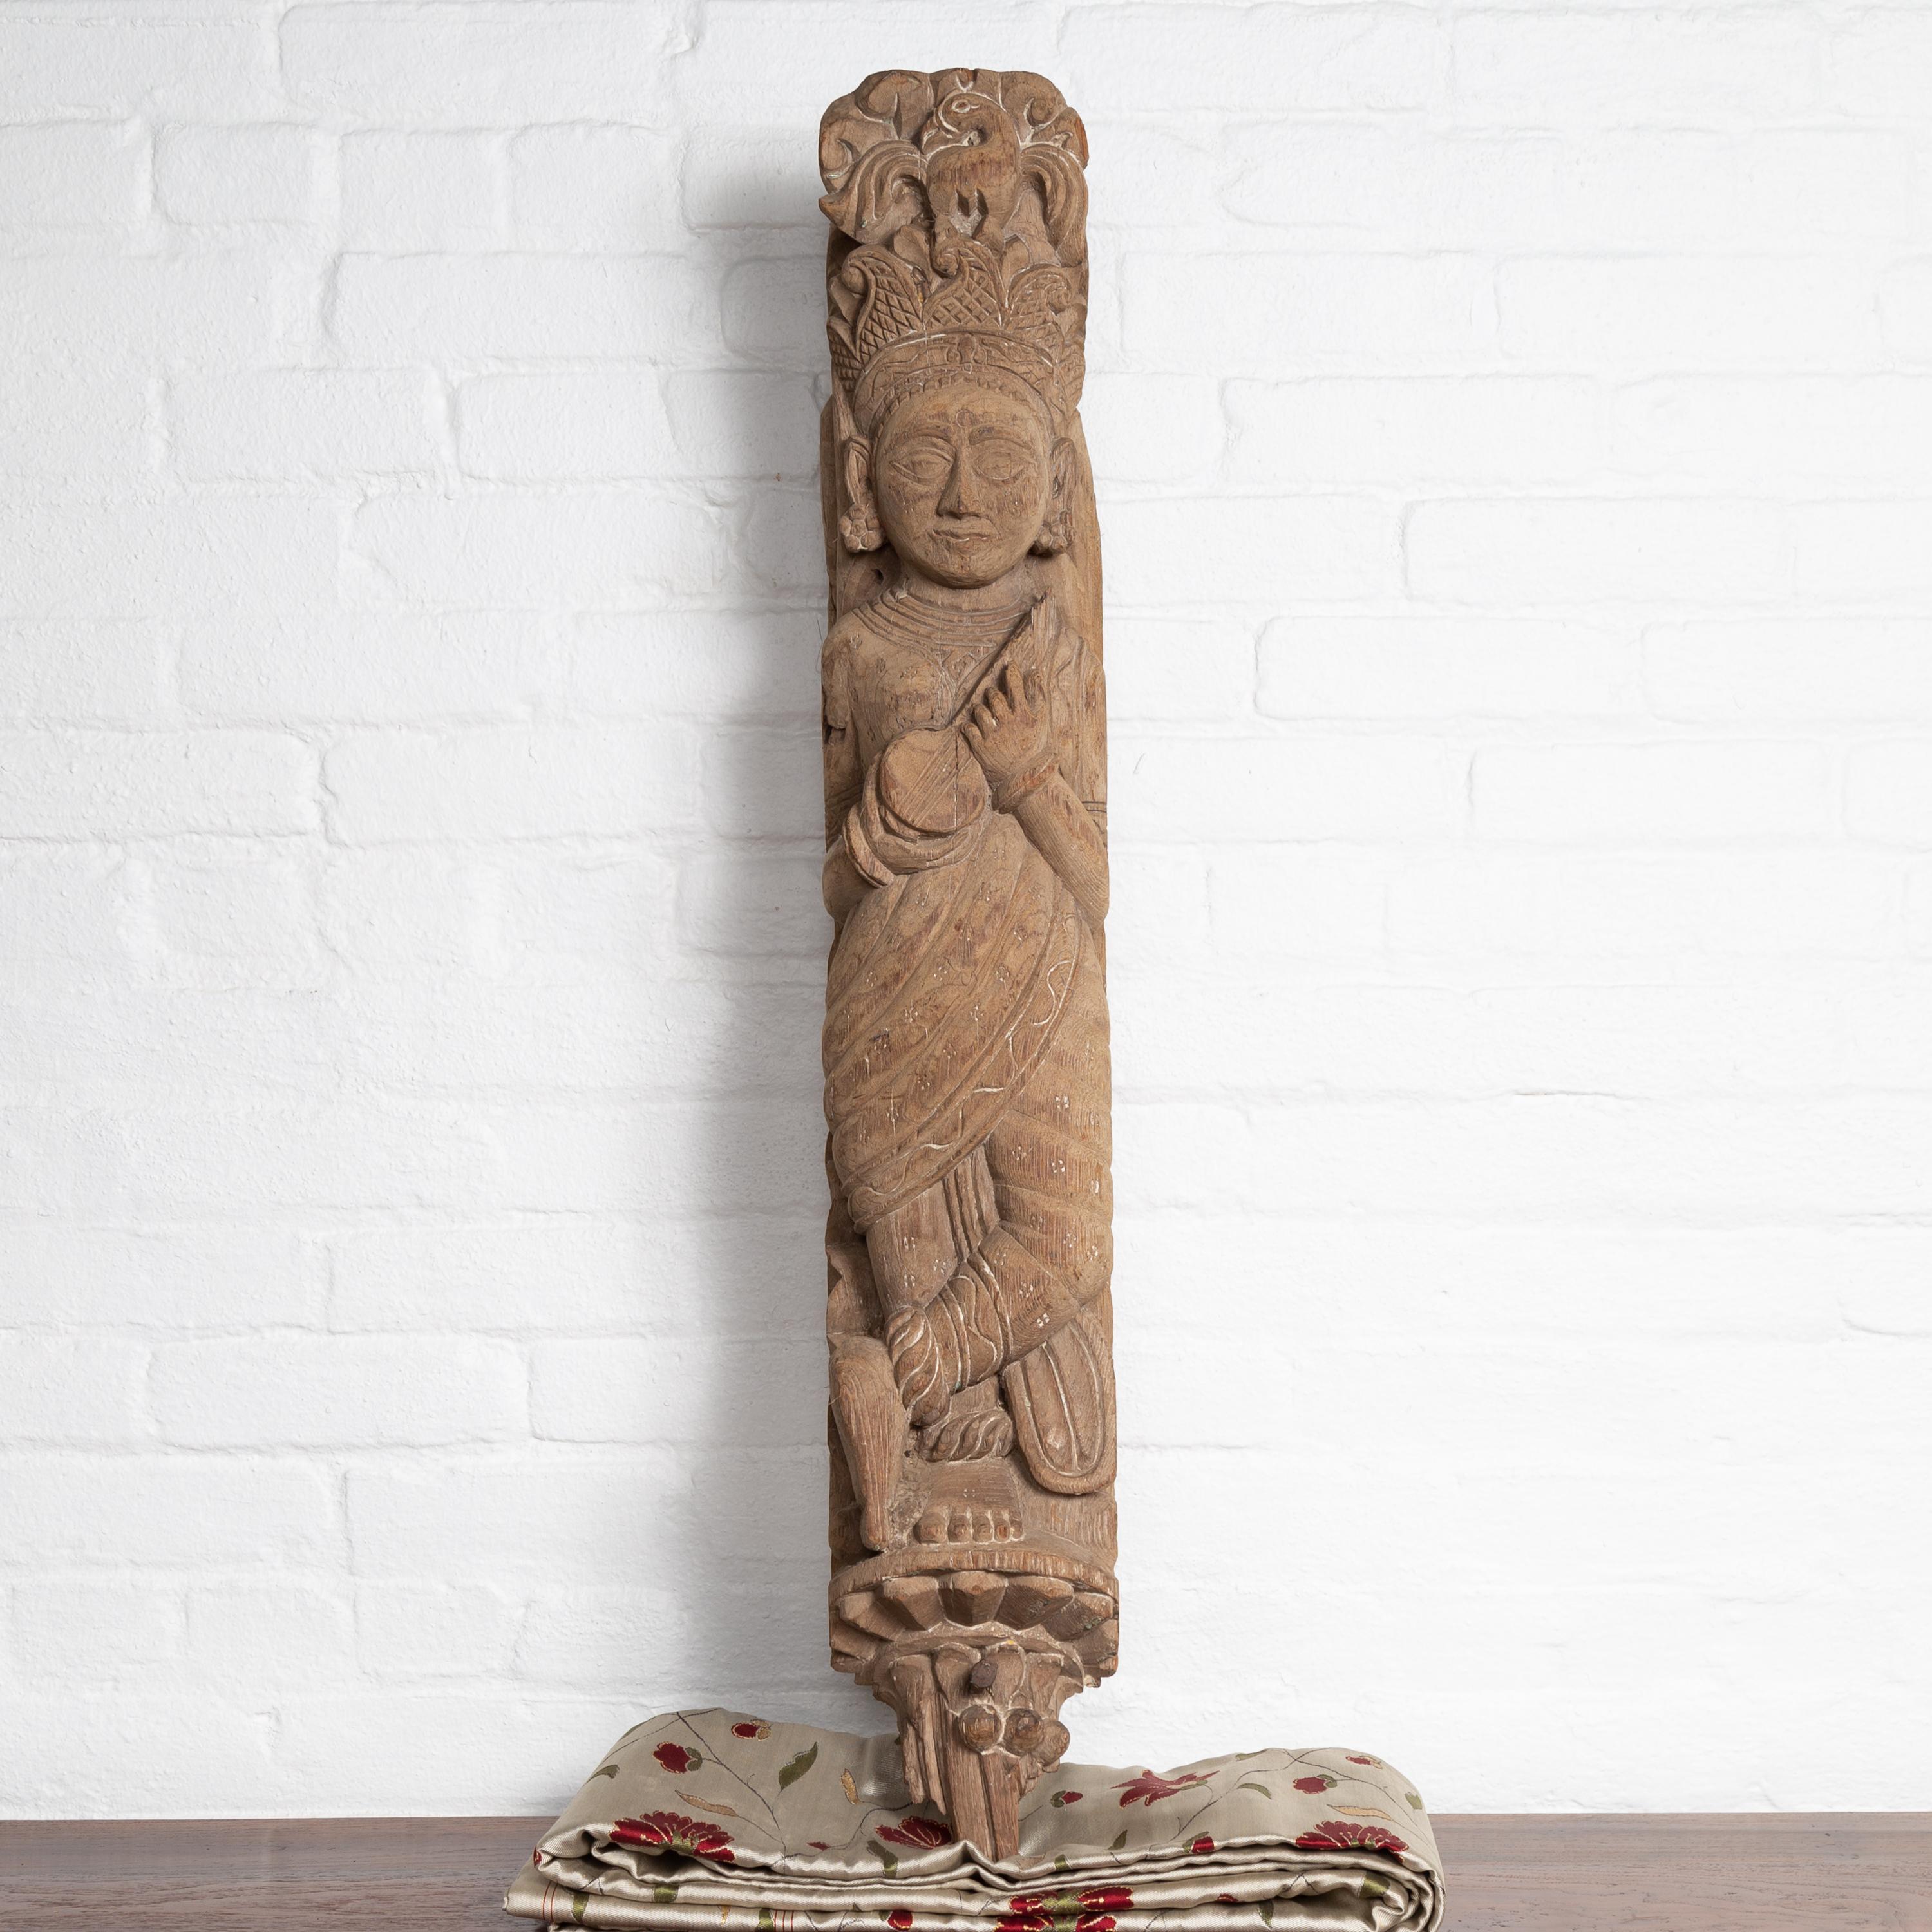 An antique hand carved Indian temple carving from Gujarat from the early 20th century, depicting a celestial musician. Born in the Western portion of India in the state of Gujarat, this exquisite hand carved temple sculpture features a female